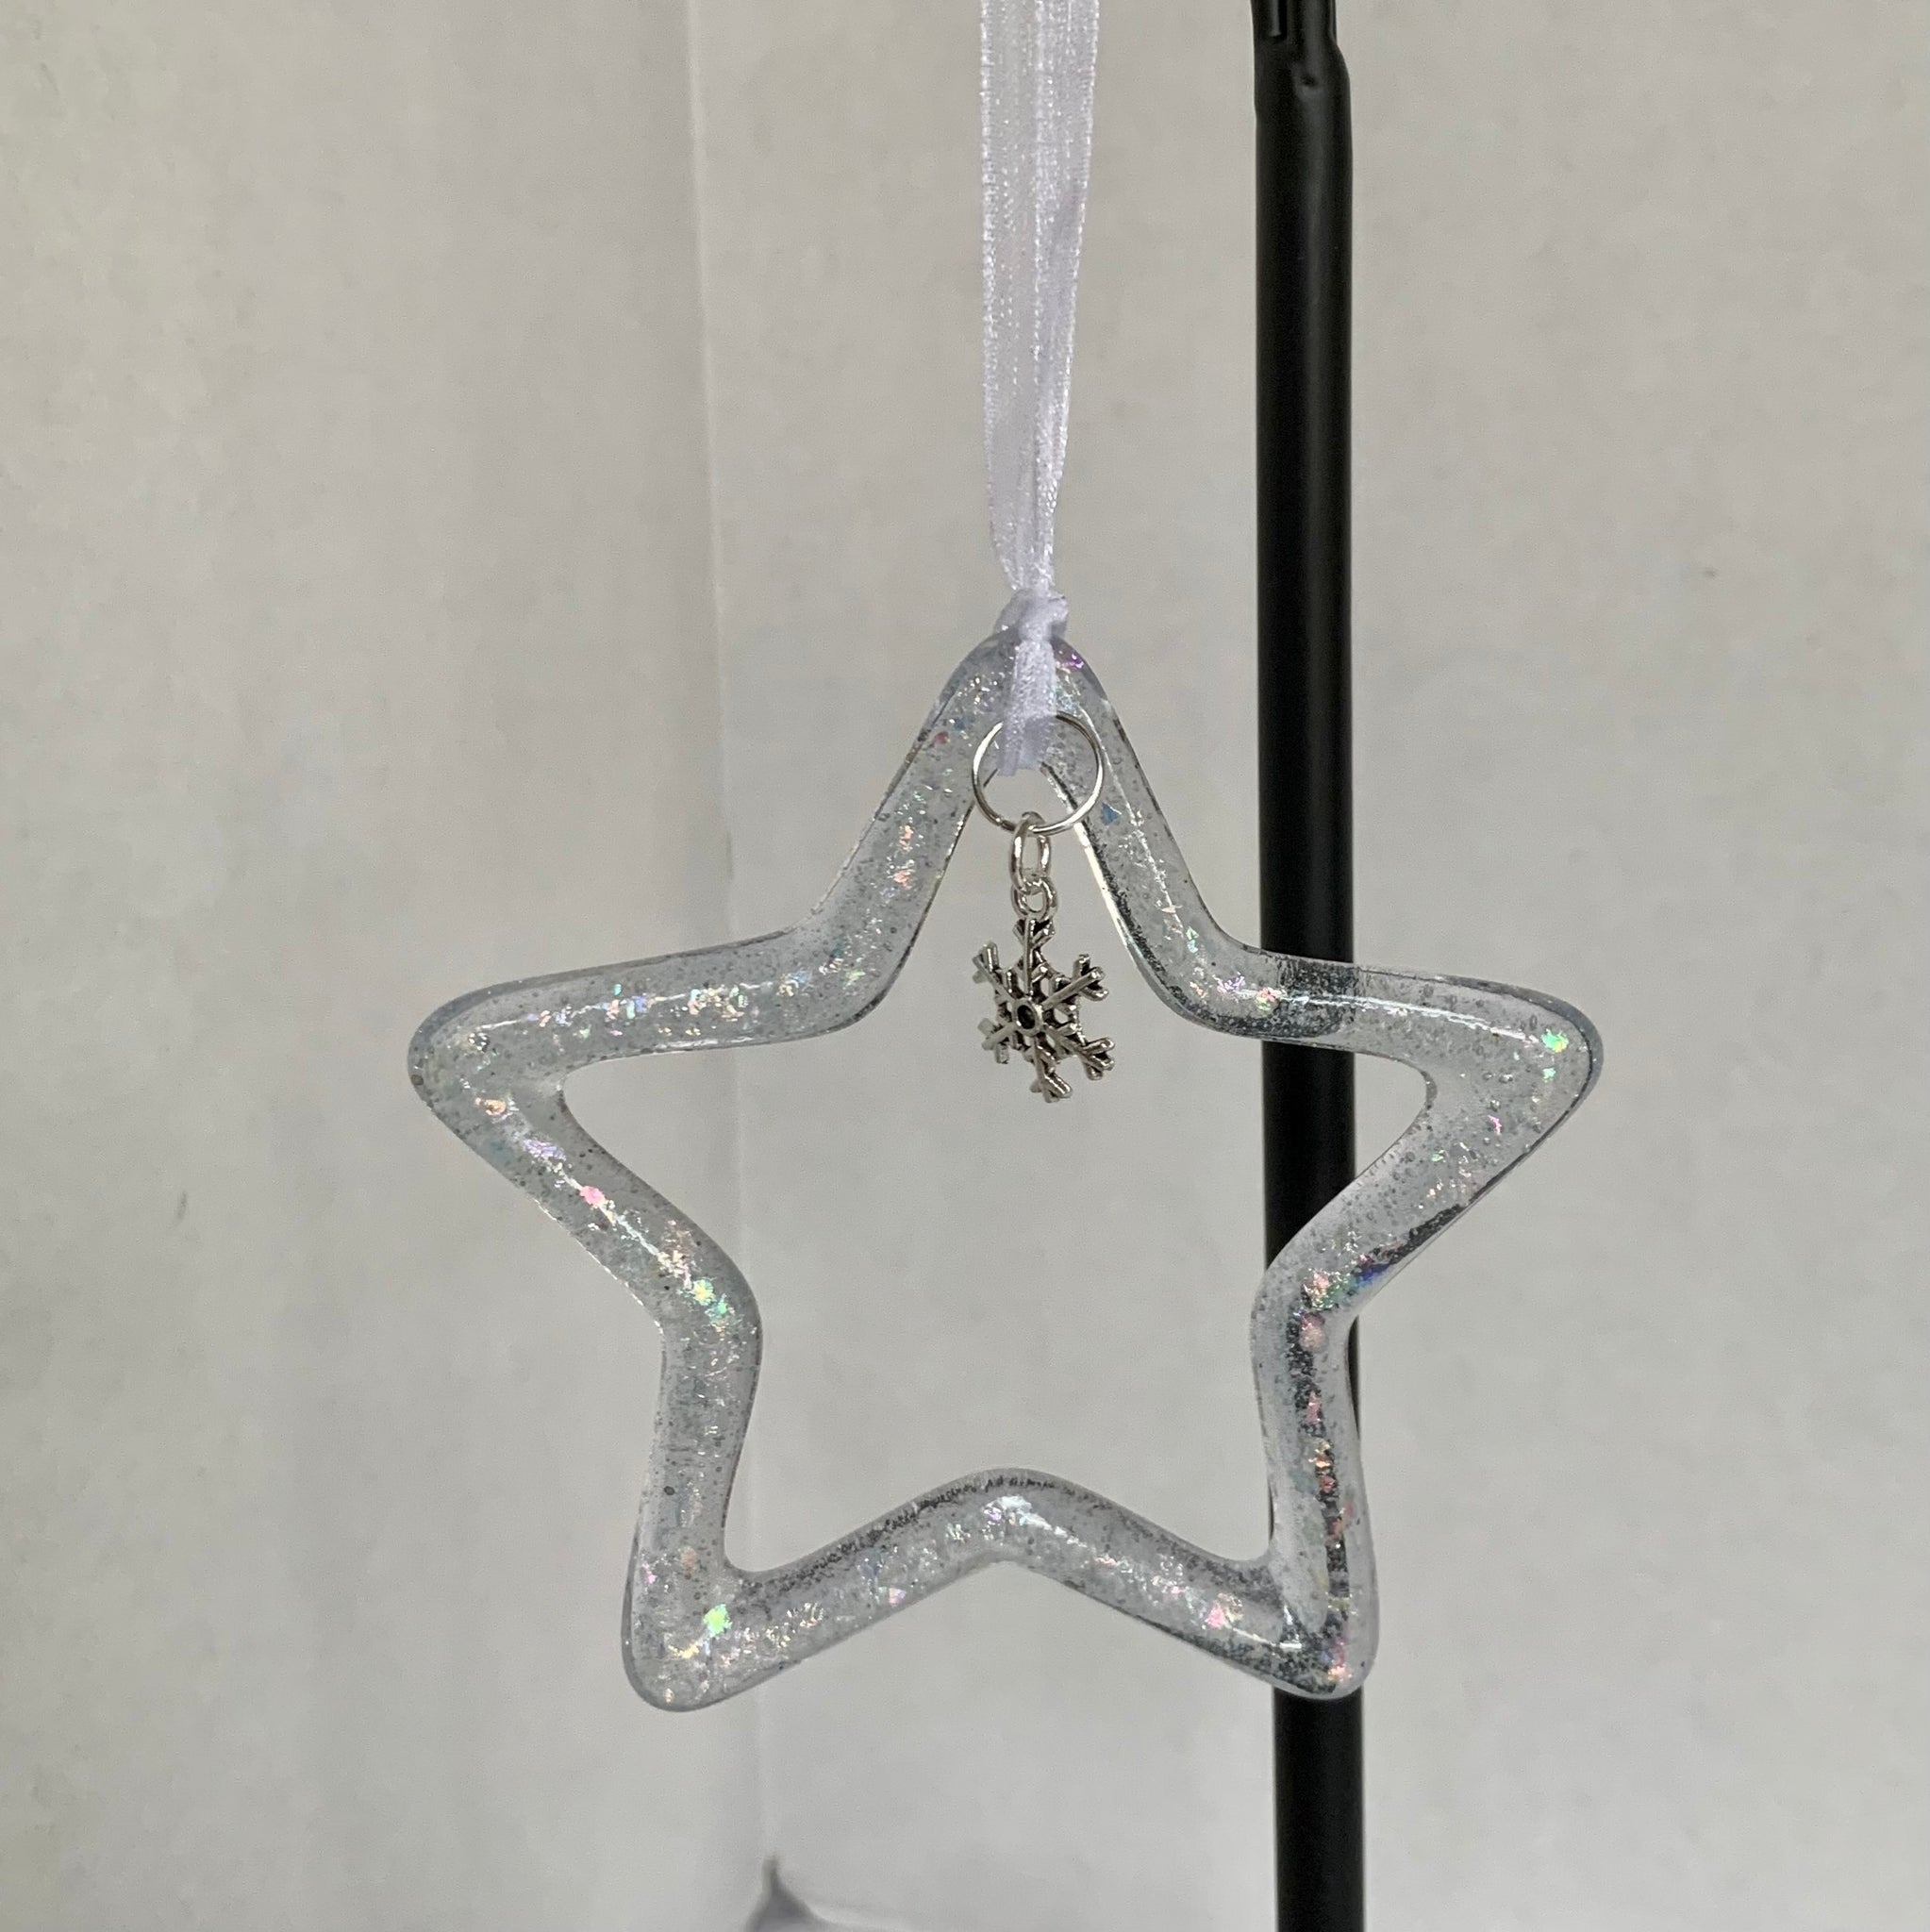 Dicroic Star ornaments with snowflake charm.